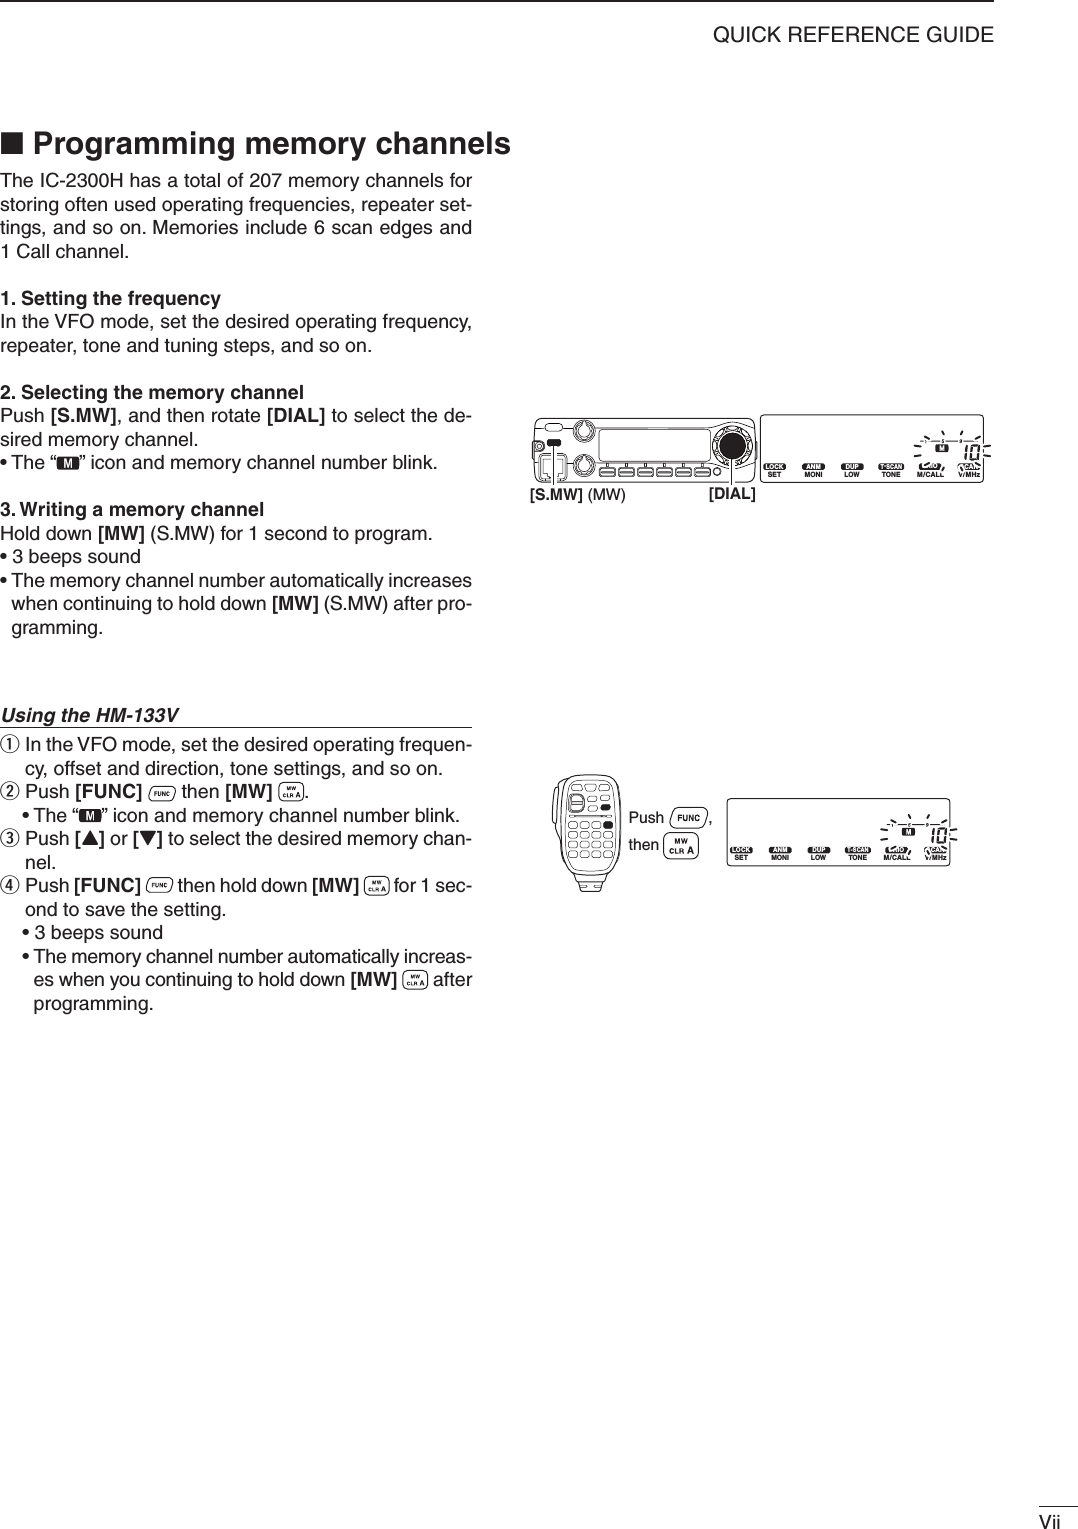 ViiQUICK REFERENCE GUIDEThe IC-2300H has a total of 207 memory channels for storing often used operating frequencies, repeater set-tings, and so on. Memories include 6 scan edges and 1 Call channel. 1. Setting the frequencyIn the VFO mode, set the desired operating frequency, repeater, tone and tuning steps, and so on.2. Selecting the memory channel Push [S.MW], and then rotate [DIAL] to select the de-sired memory channel.• The “ ” icon and memory channel number blink.3. Writing a memory channelHold down [MW] (S.MW) for 1 second to program.• 3 beeps sound•  The memory channel number automatically increases when continuing to hold down [MW] (S.MW) after pro-gramming.Using the HM-133Vq  In the VFO mode, set the desired operating frequen-cy, offset and direction, tone settings, and so on.w Push [FUNC]   then [MW]  . • The “ ” icon and memory channel number blink.e  Push [Y] or [Z] to select the desired memory chan-nel.r  Push [FUNC]   then hold down [MW]   for 1 sec-ond to save the setting.  • 3 beeps sound •  The memory channel number automatically increas-es when you continuing to hold down [MW]   after programming.■  Programming memory channelsLOCKSETANMMONIDUPLOWT-SCANTONEPRIOM/CALLSCANV/MHzDIGITAL PRIO AO BUSYMUTENARMIDLOW[S.MW] (MW) [DIAL]LOCKSETANMMONIDUPLOWT-SCANTONEPRIOM/CALLSCANV/MHzDIGITAL PRIO AO BUSYMUTENARMIDLOWPush          , then 